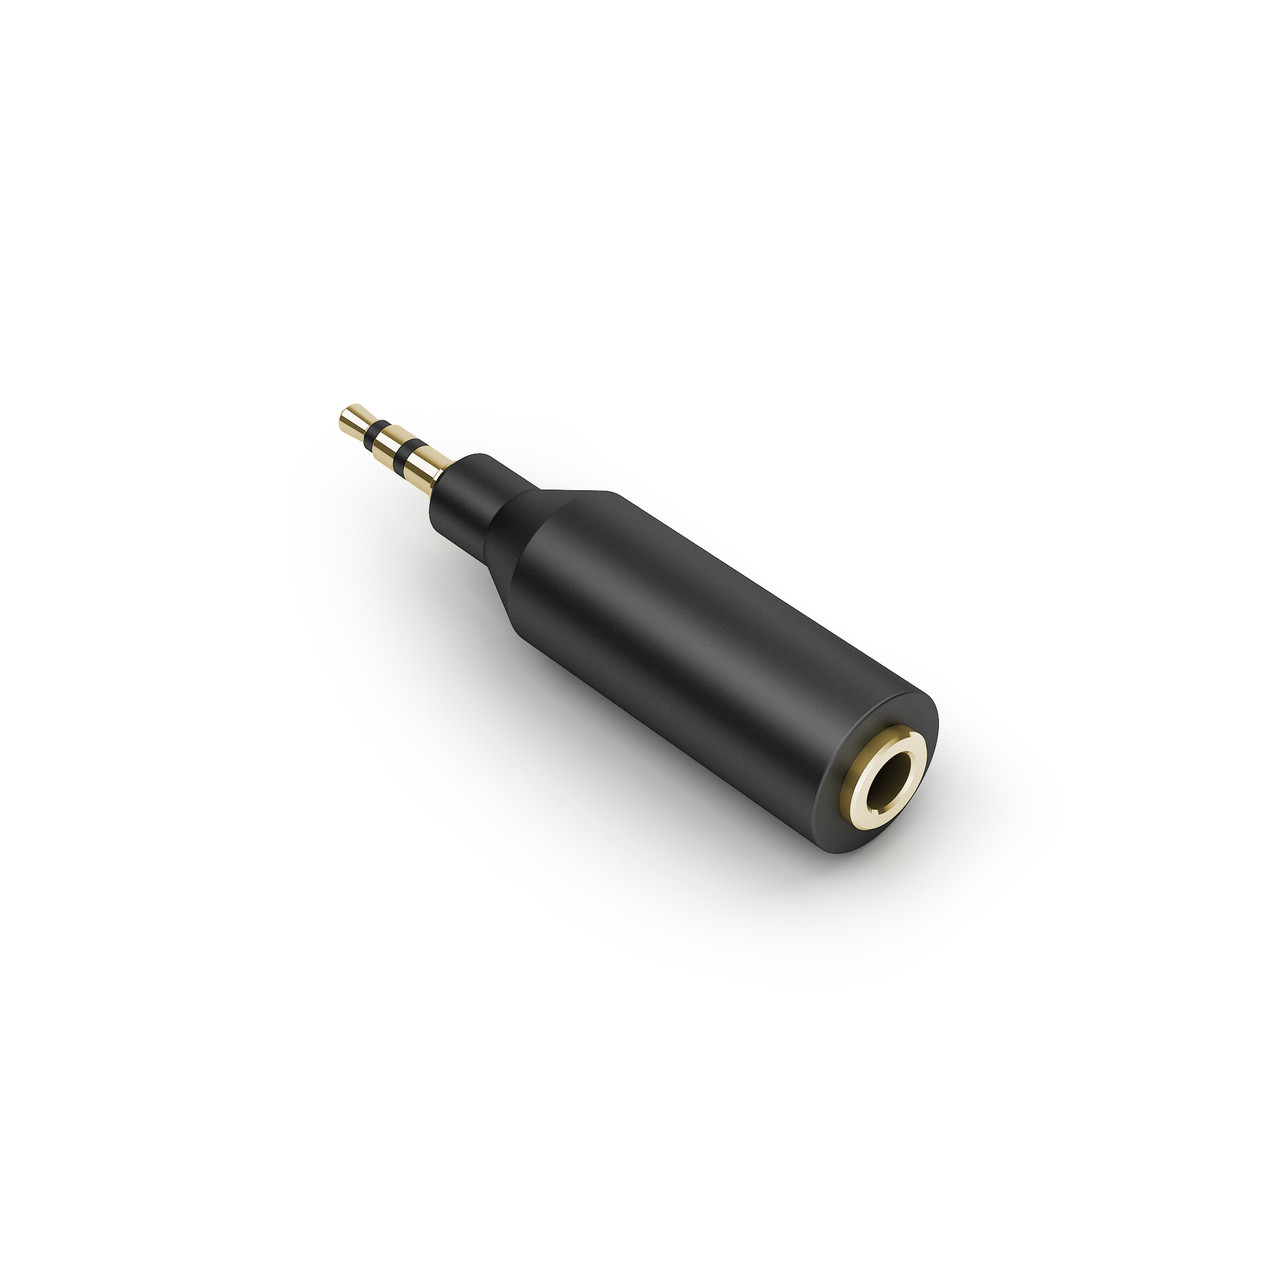 MEE audio 3.5mm to 2.5mm stereo audio adapter for select Sennheiser, JBL,  Klipsch, and Bose headphones